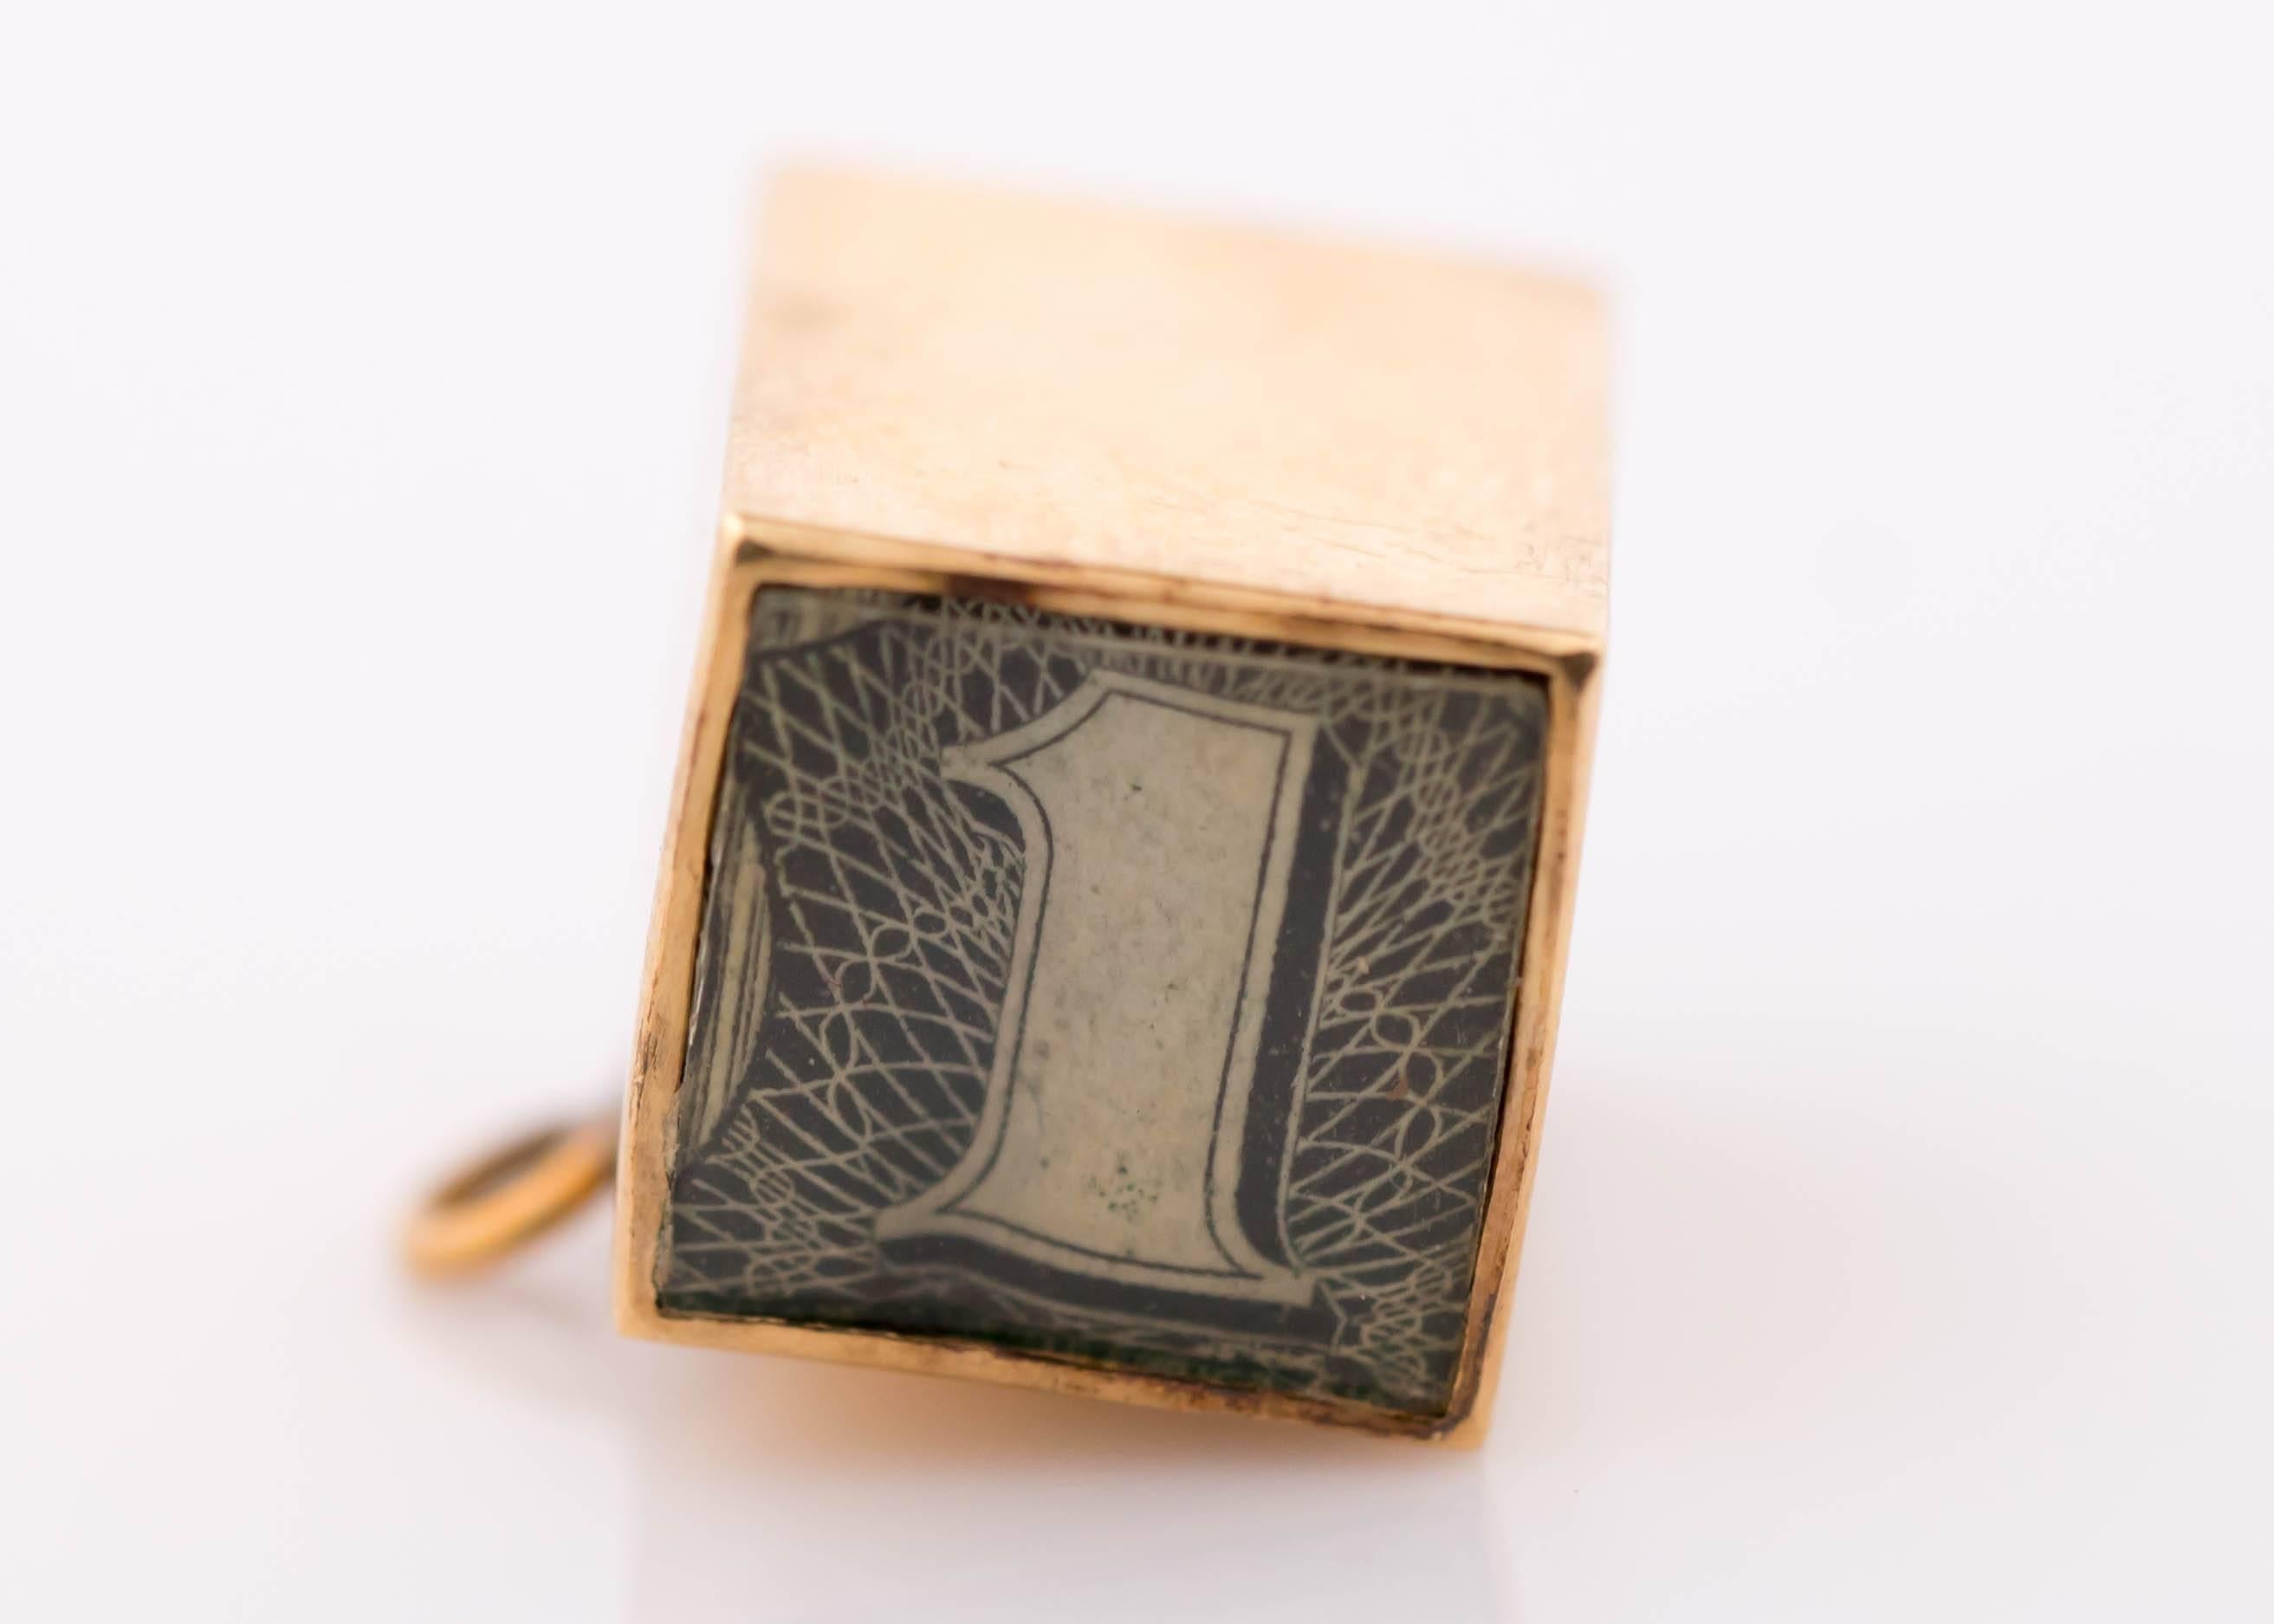 1950s A.C. $1 Dollar Cube Charm - 14 Karat Yellow Gold
Engraved: IN EMERGENCY BREAK GLASS

This Unique, One of a Kind Charm makes a great Pendant or Charm addition to your favorite bracelet or necklace. The cube is 14 Karat Gold on 4 sides with